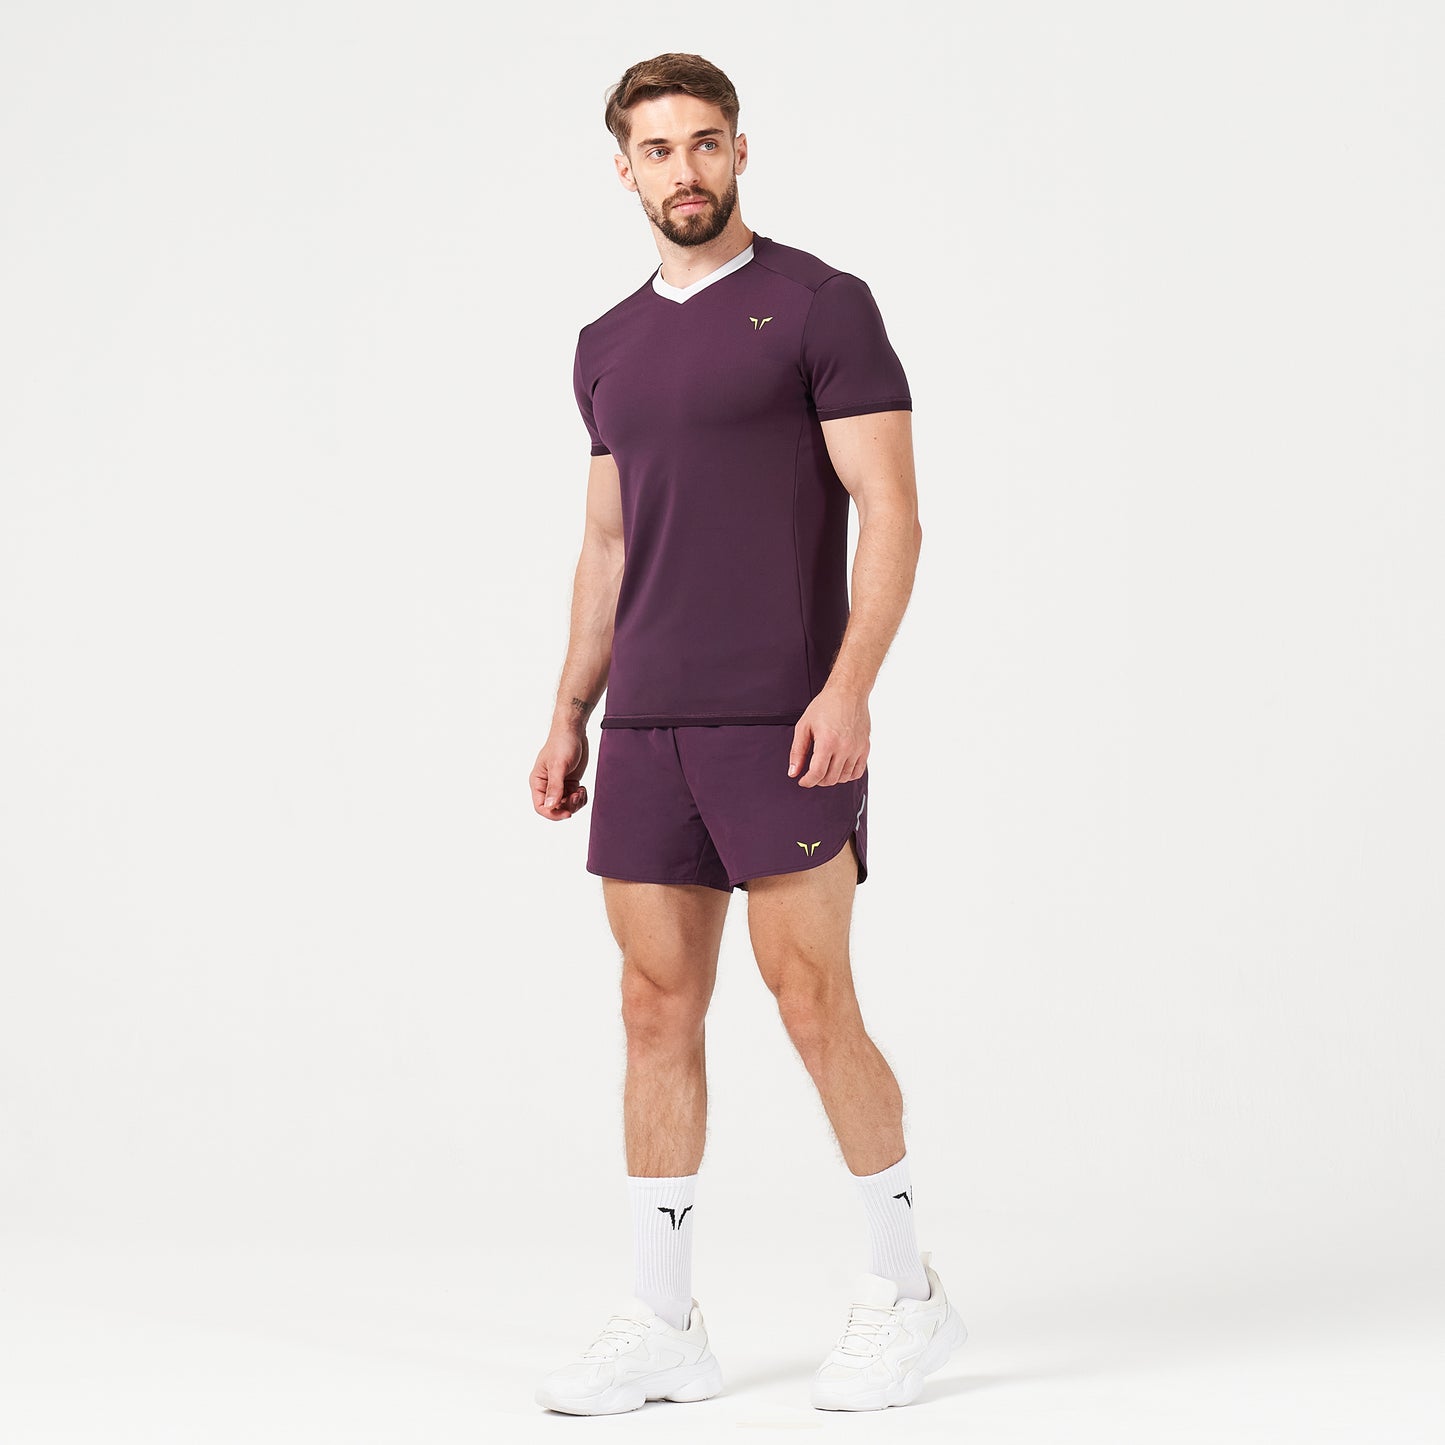 squatwolf-gym-wear-lab360-tdry-tee-plum-perfect-workout-shirts-for-men